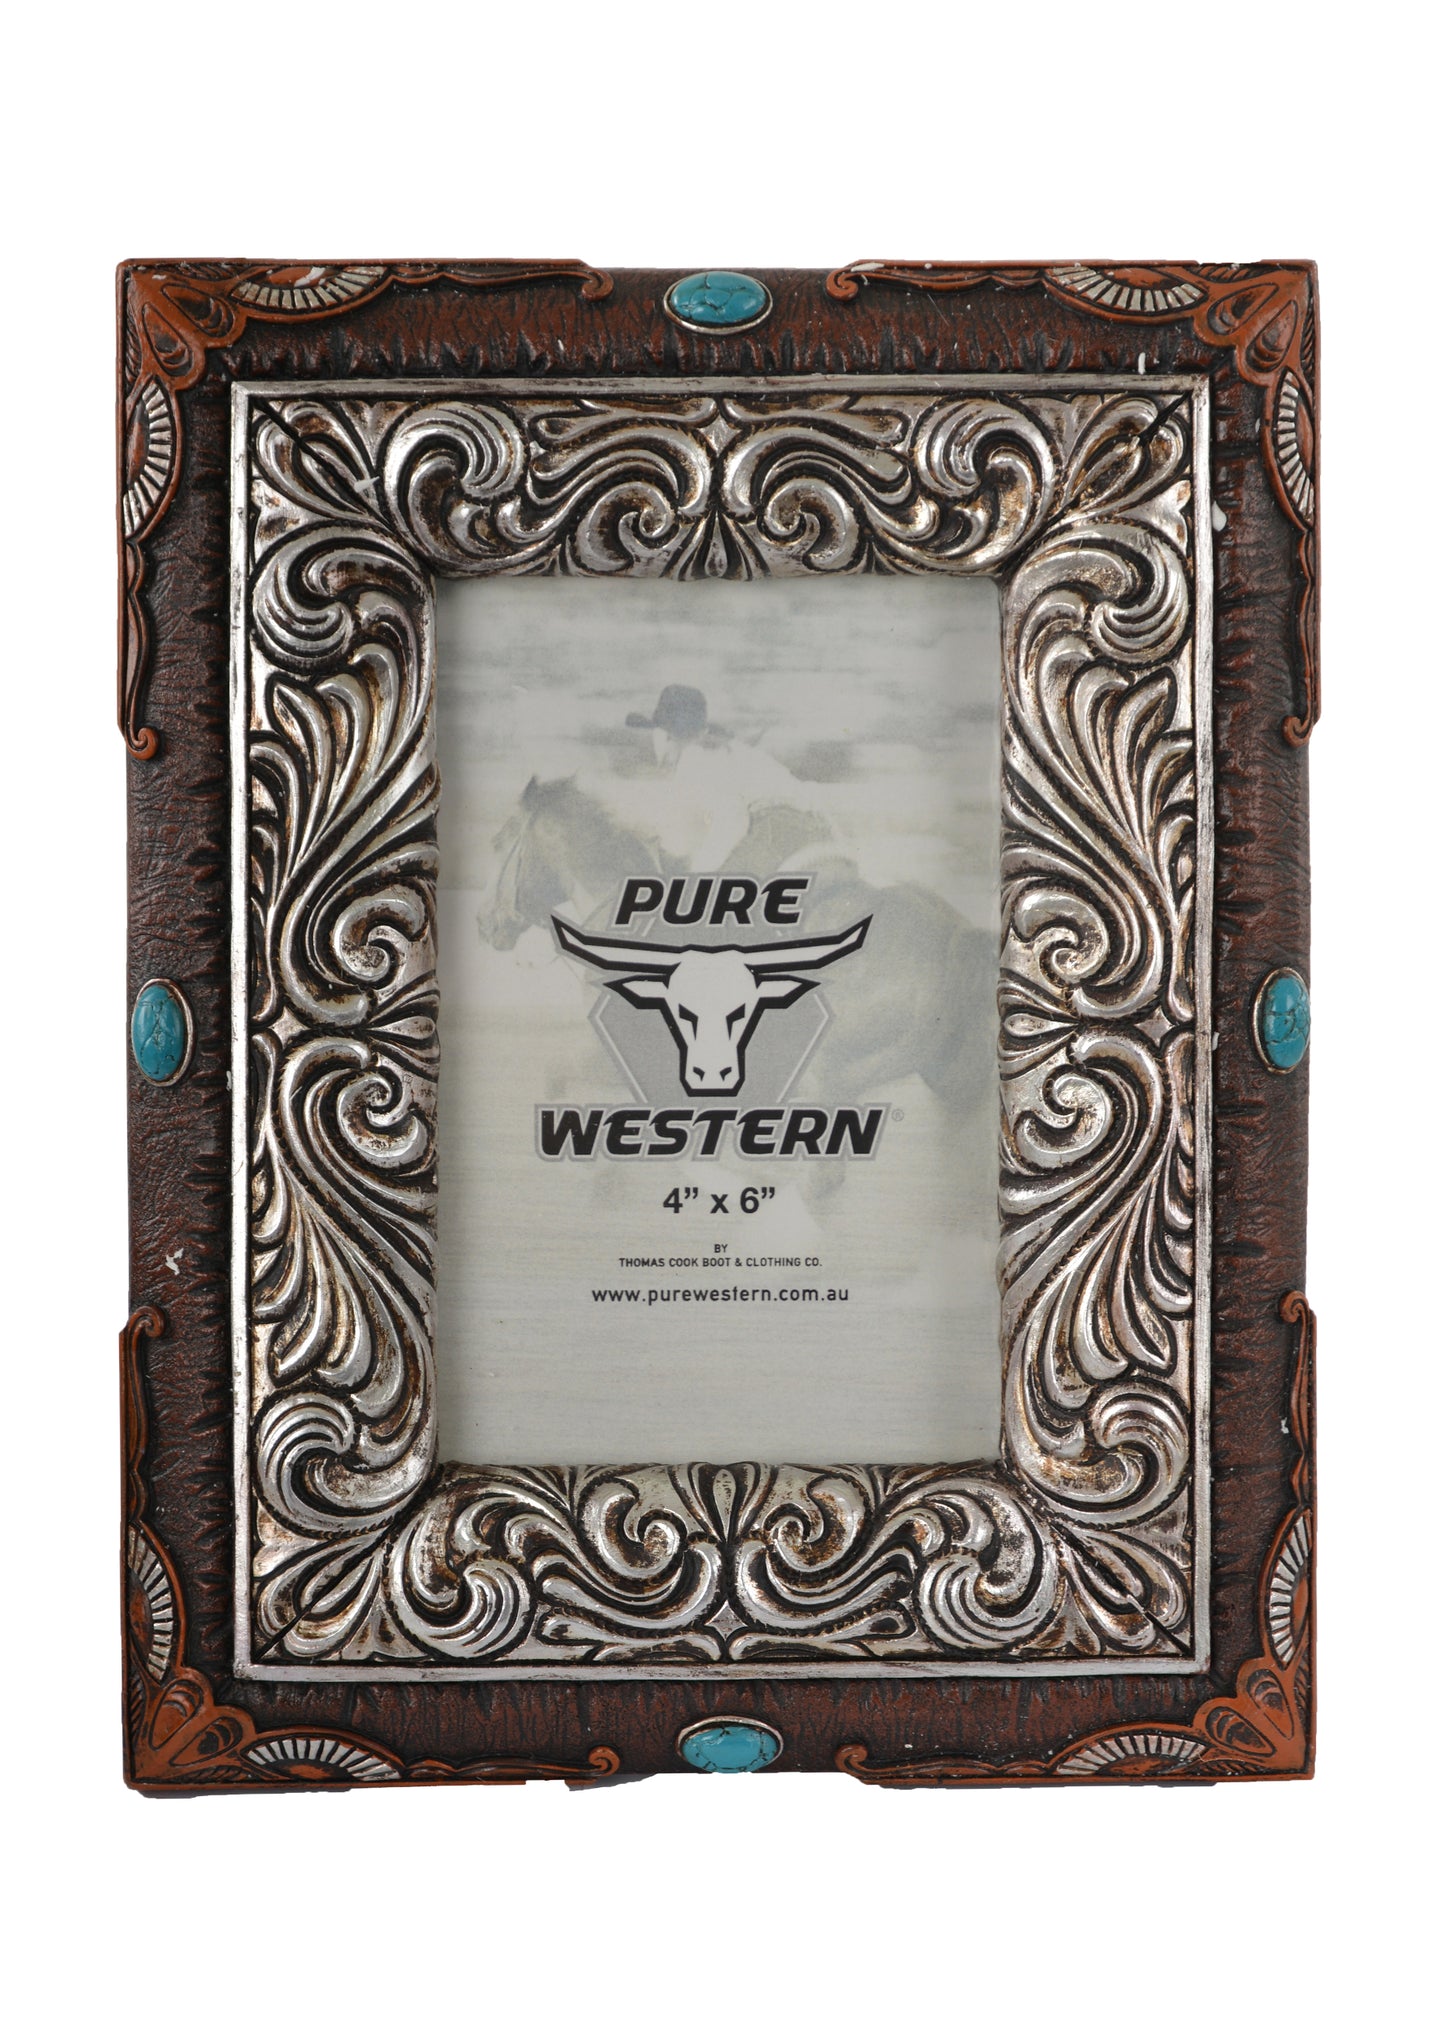 Pure Western Silver Baroque Picture Frame 4 x 6"